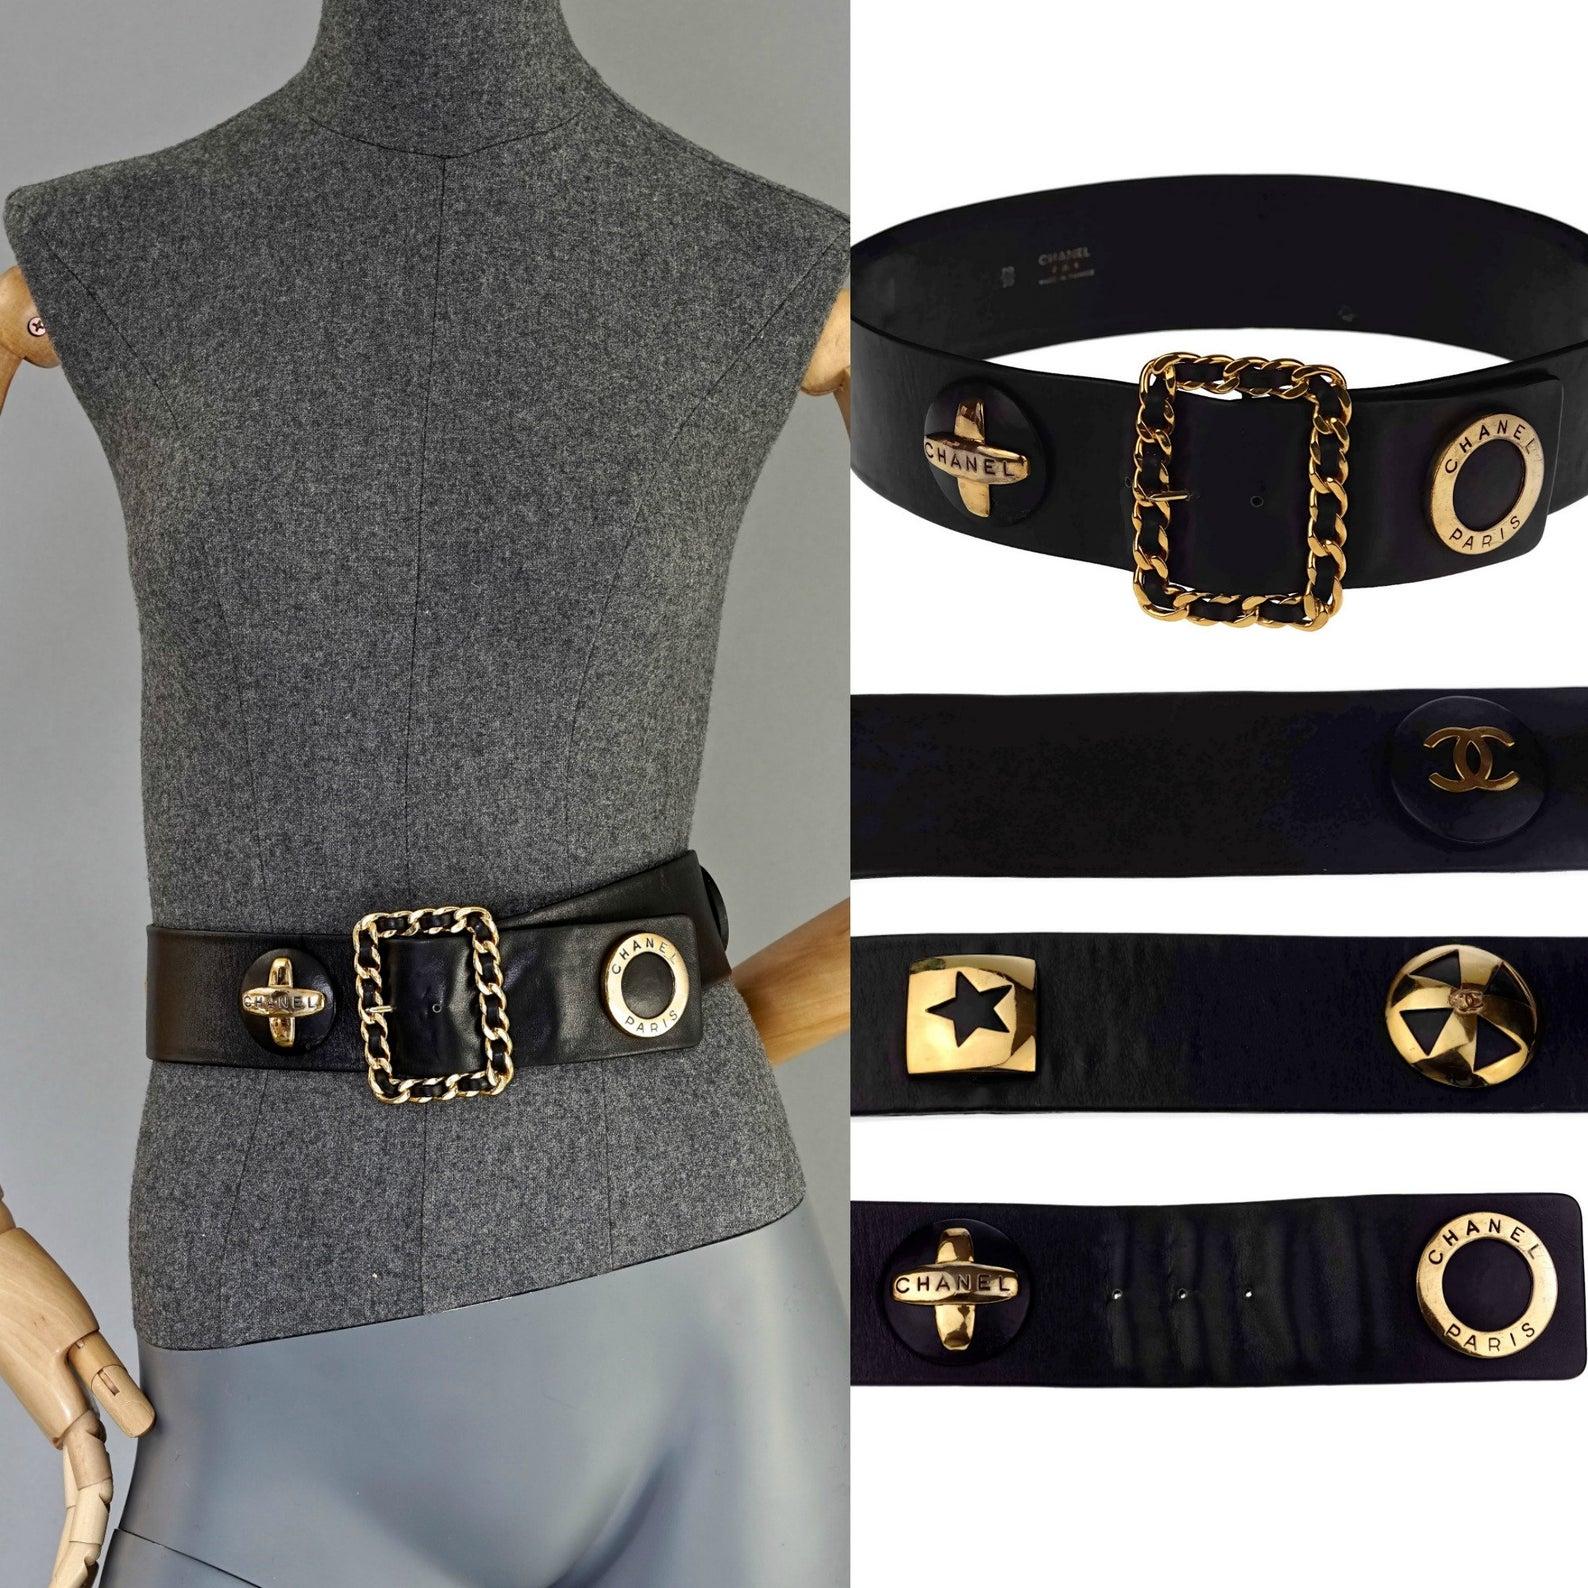 Vintage Iconic CHANEL Metal Emblem Leather Belt

Measurements:
Height: 3.07 inches (7.8 cm)
Wearable Length: 26.96 inches, 28.14 inches, 28.93 inches (68.5 cm, 71.5 cm, 73.5 cm).
Total Length: 32.67 inches (83 cm)

Features:
- 100% Authentic